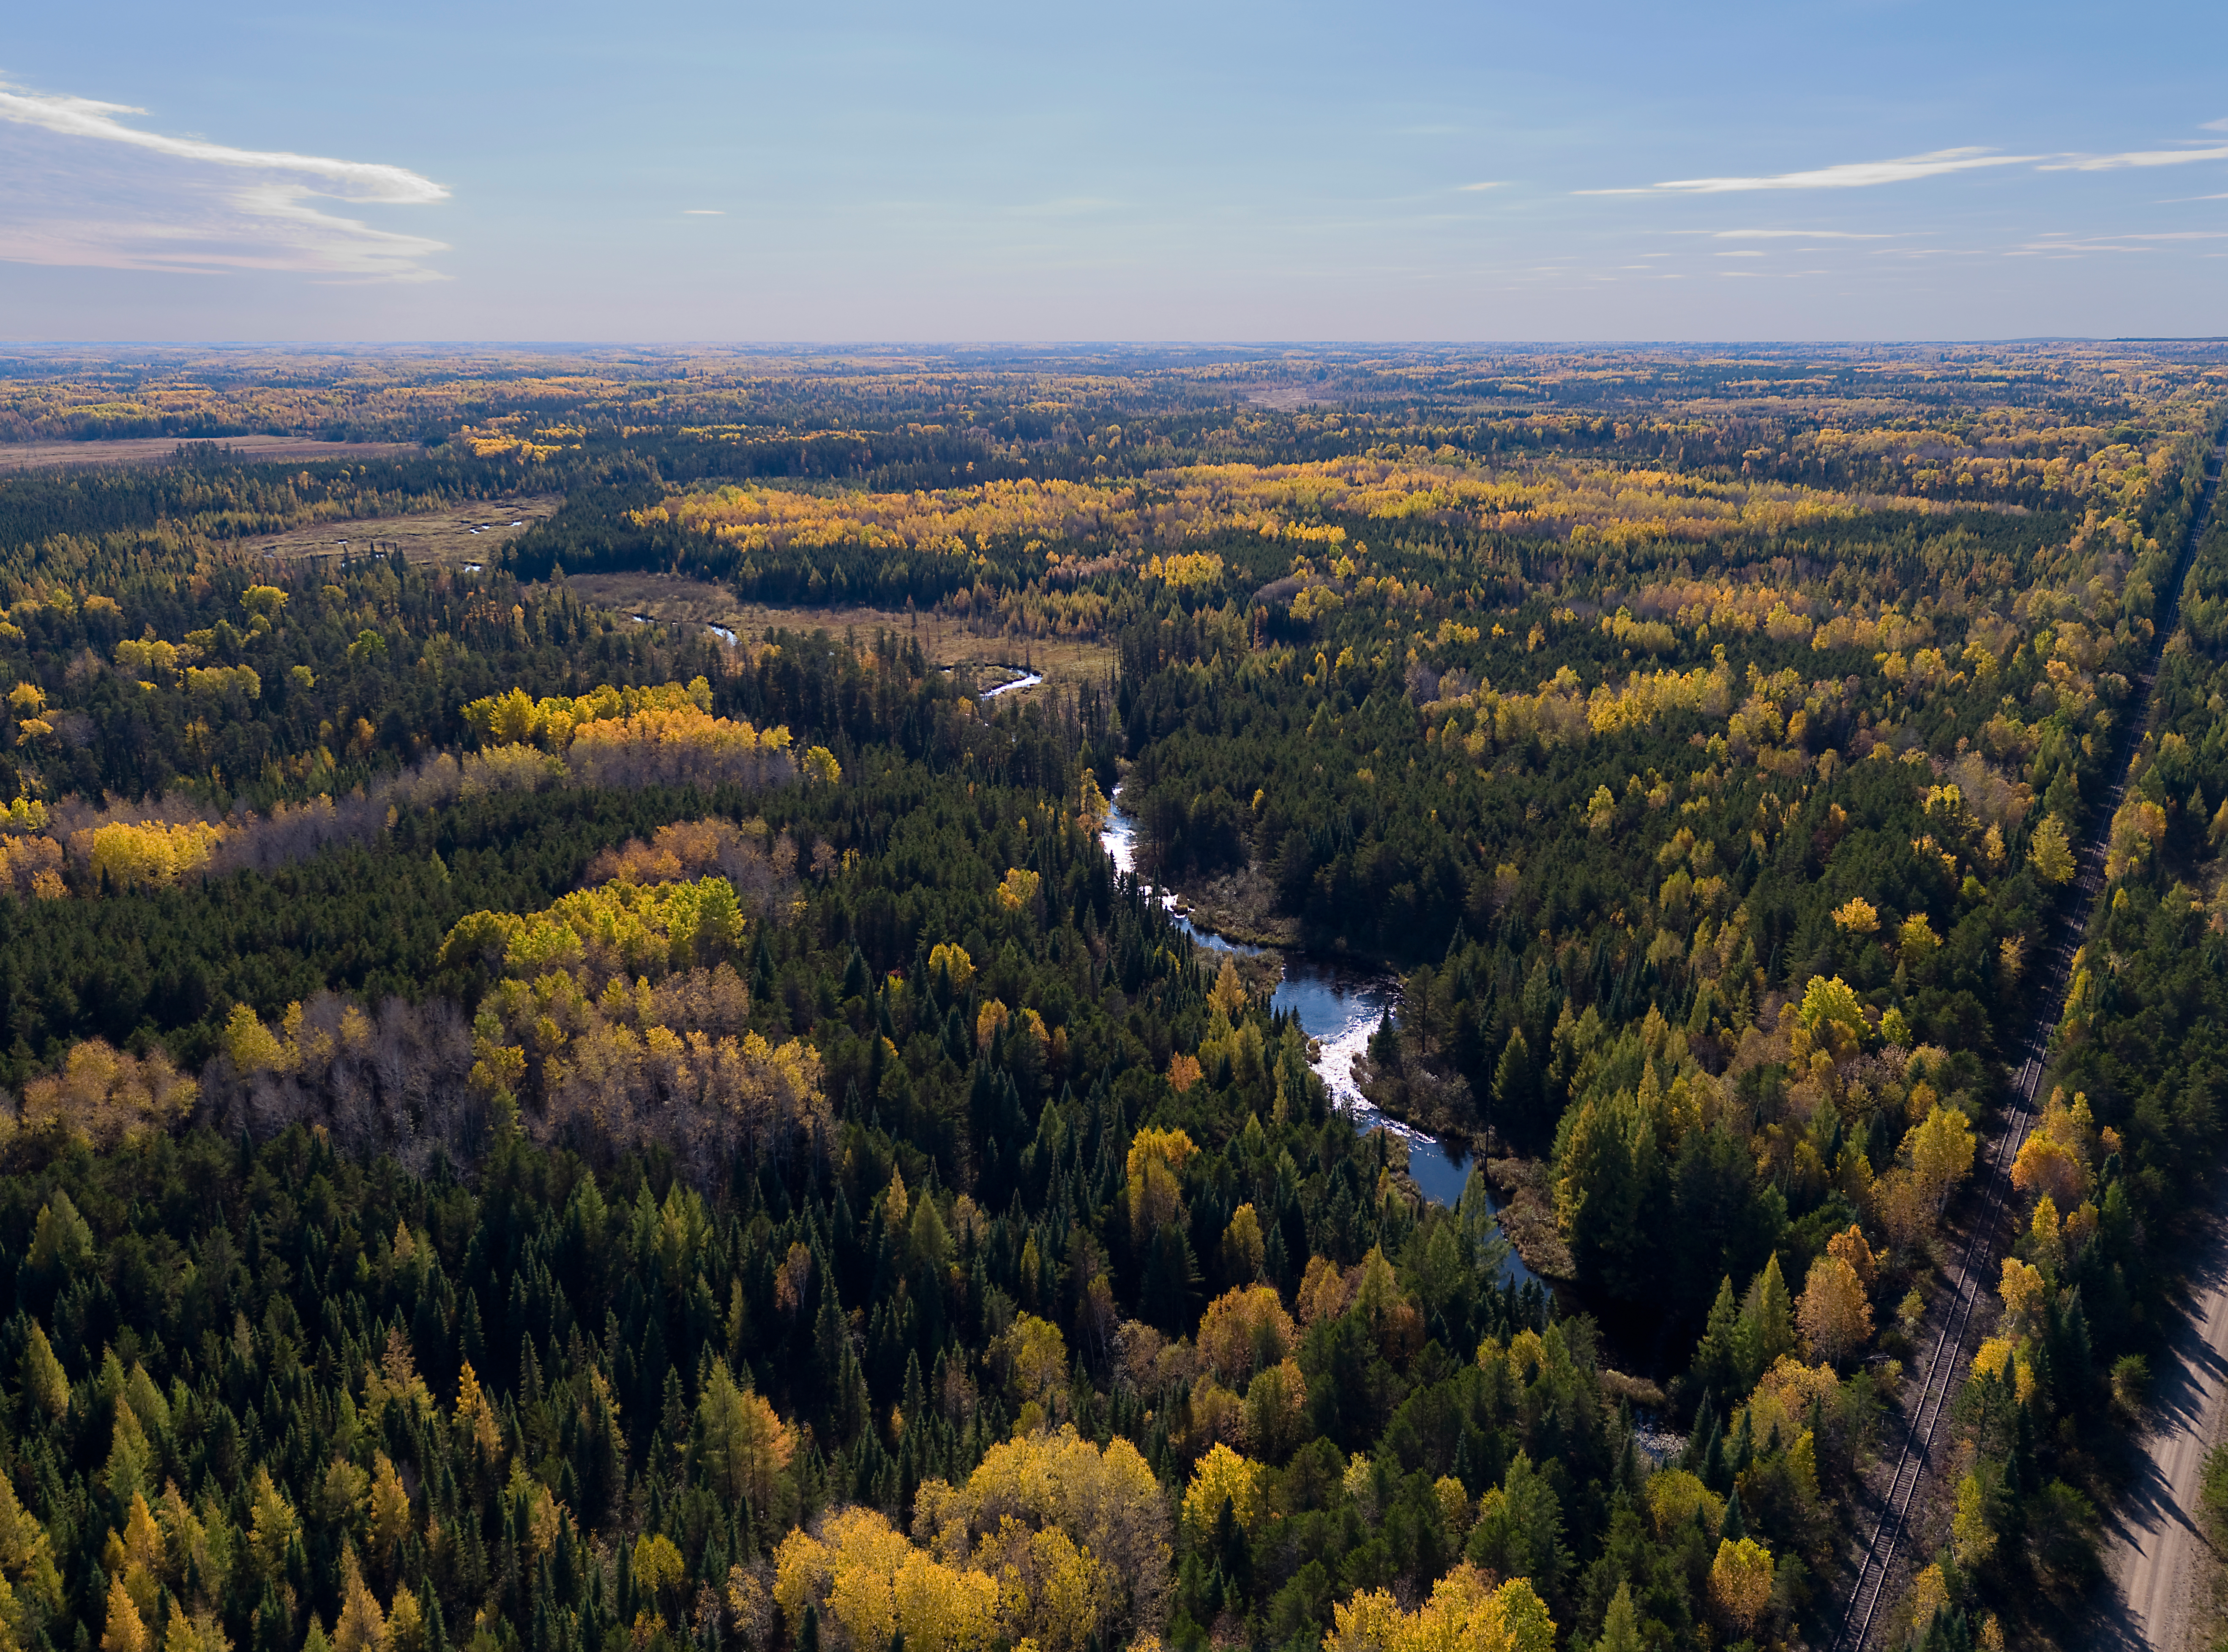 Partridge River in the area of PolyMet's proposed open pit mine. Photo Credit: Rob Levine